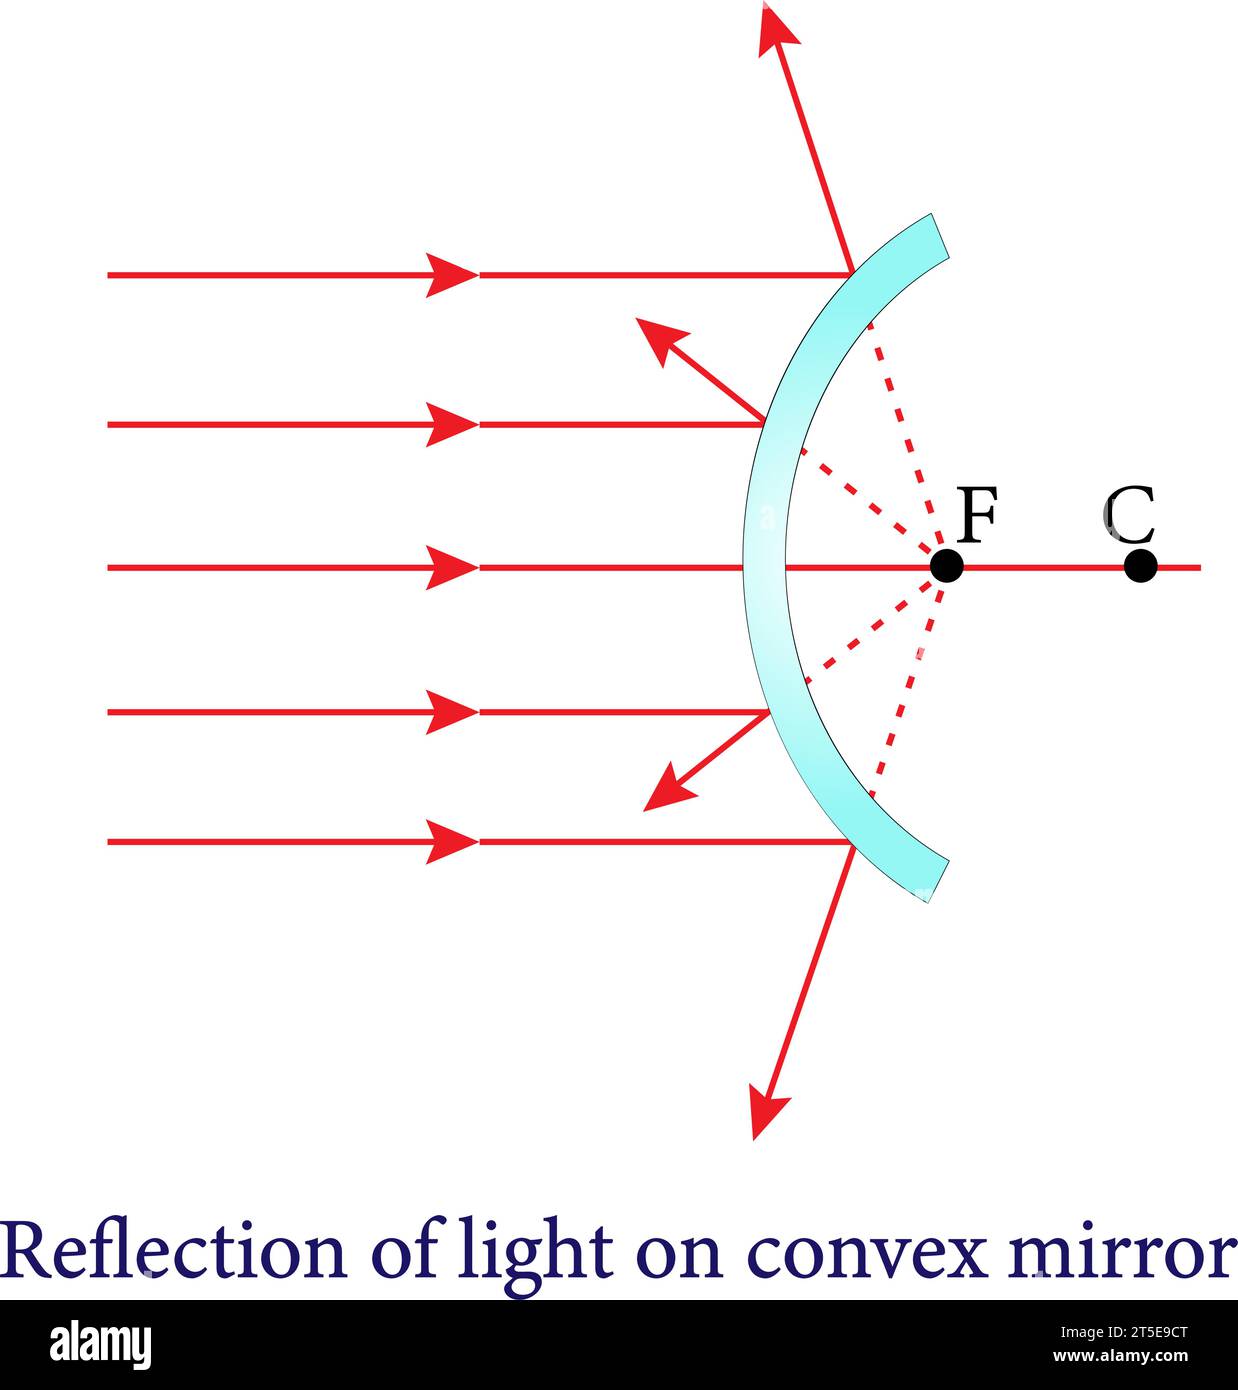 https://c8.alamy.com/comp/2T5E9CT/the-reflection-from-convex-and-concave-mirrors-reflection-and-spherical-mirrors-opticsvector-illustration-2T5E9CT.jpg